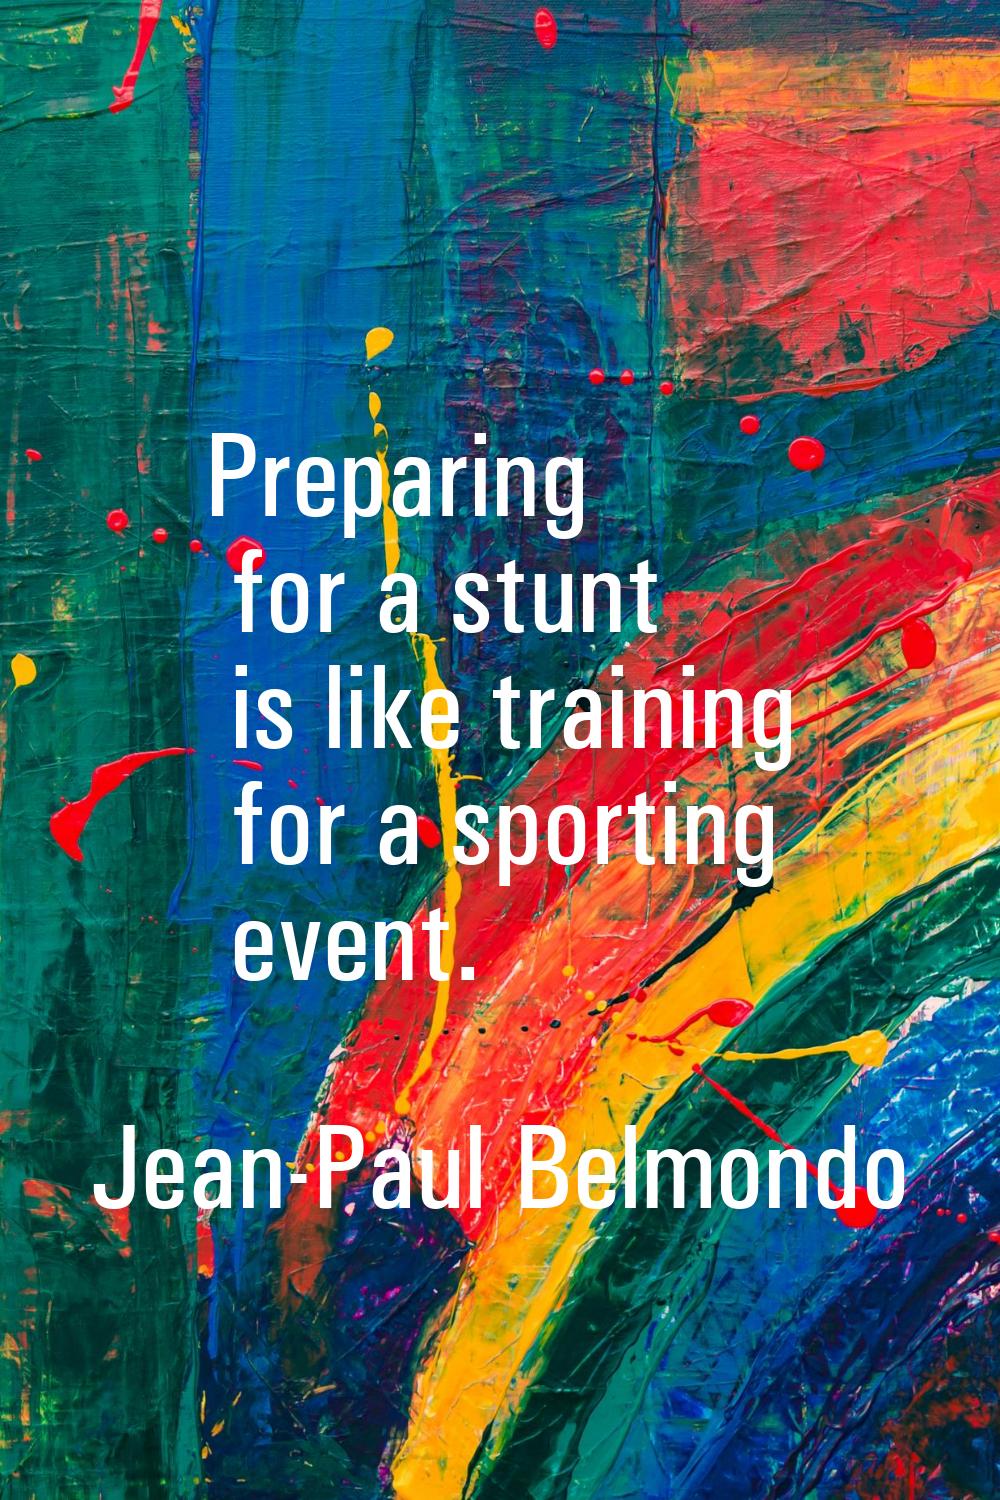 Preparing for a stunt is like training for a sporting event.